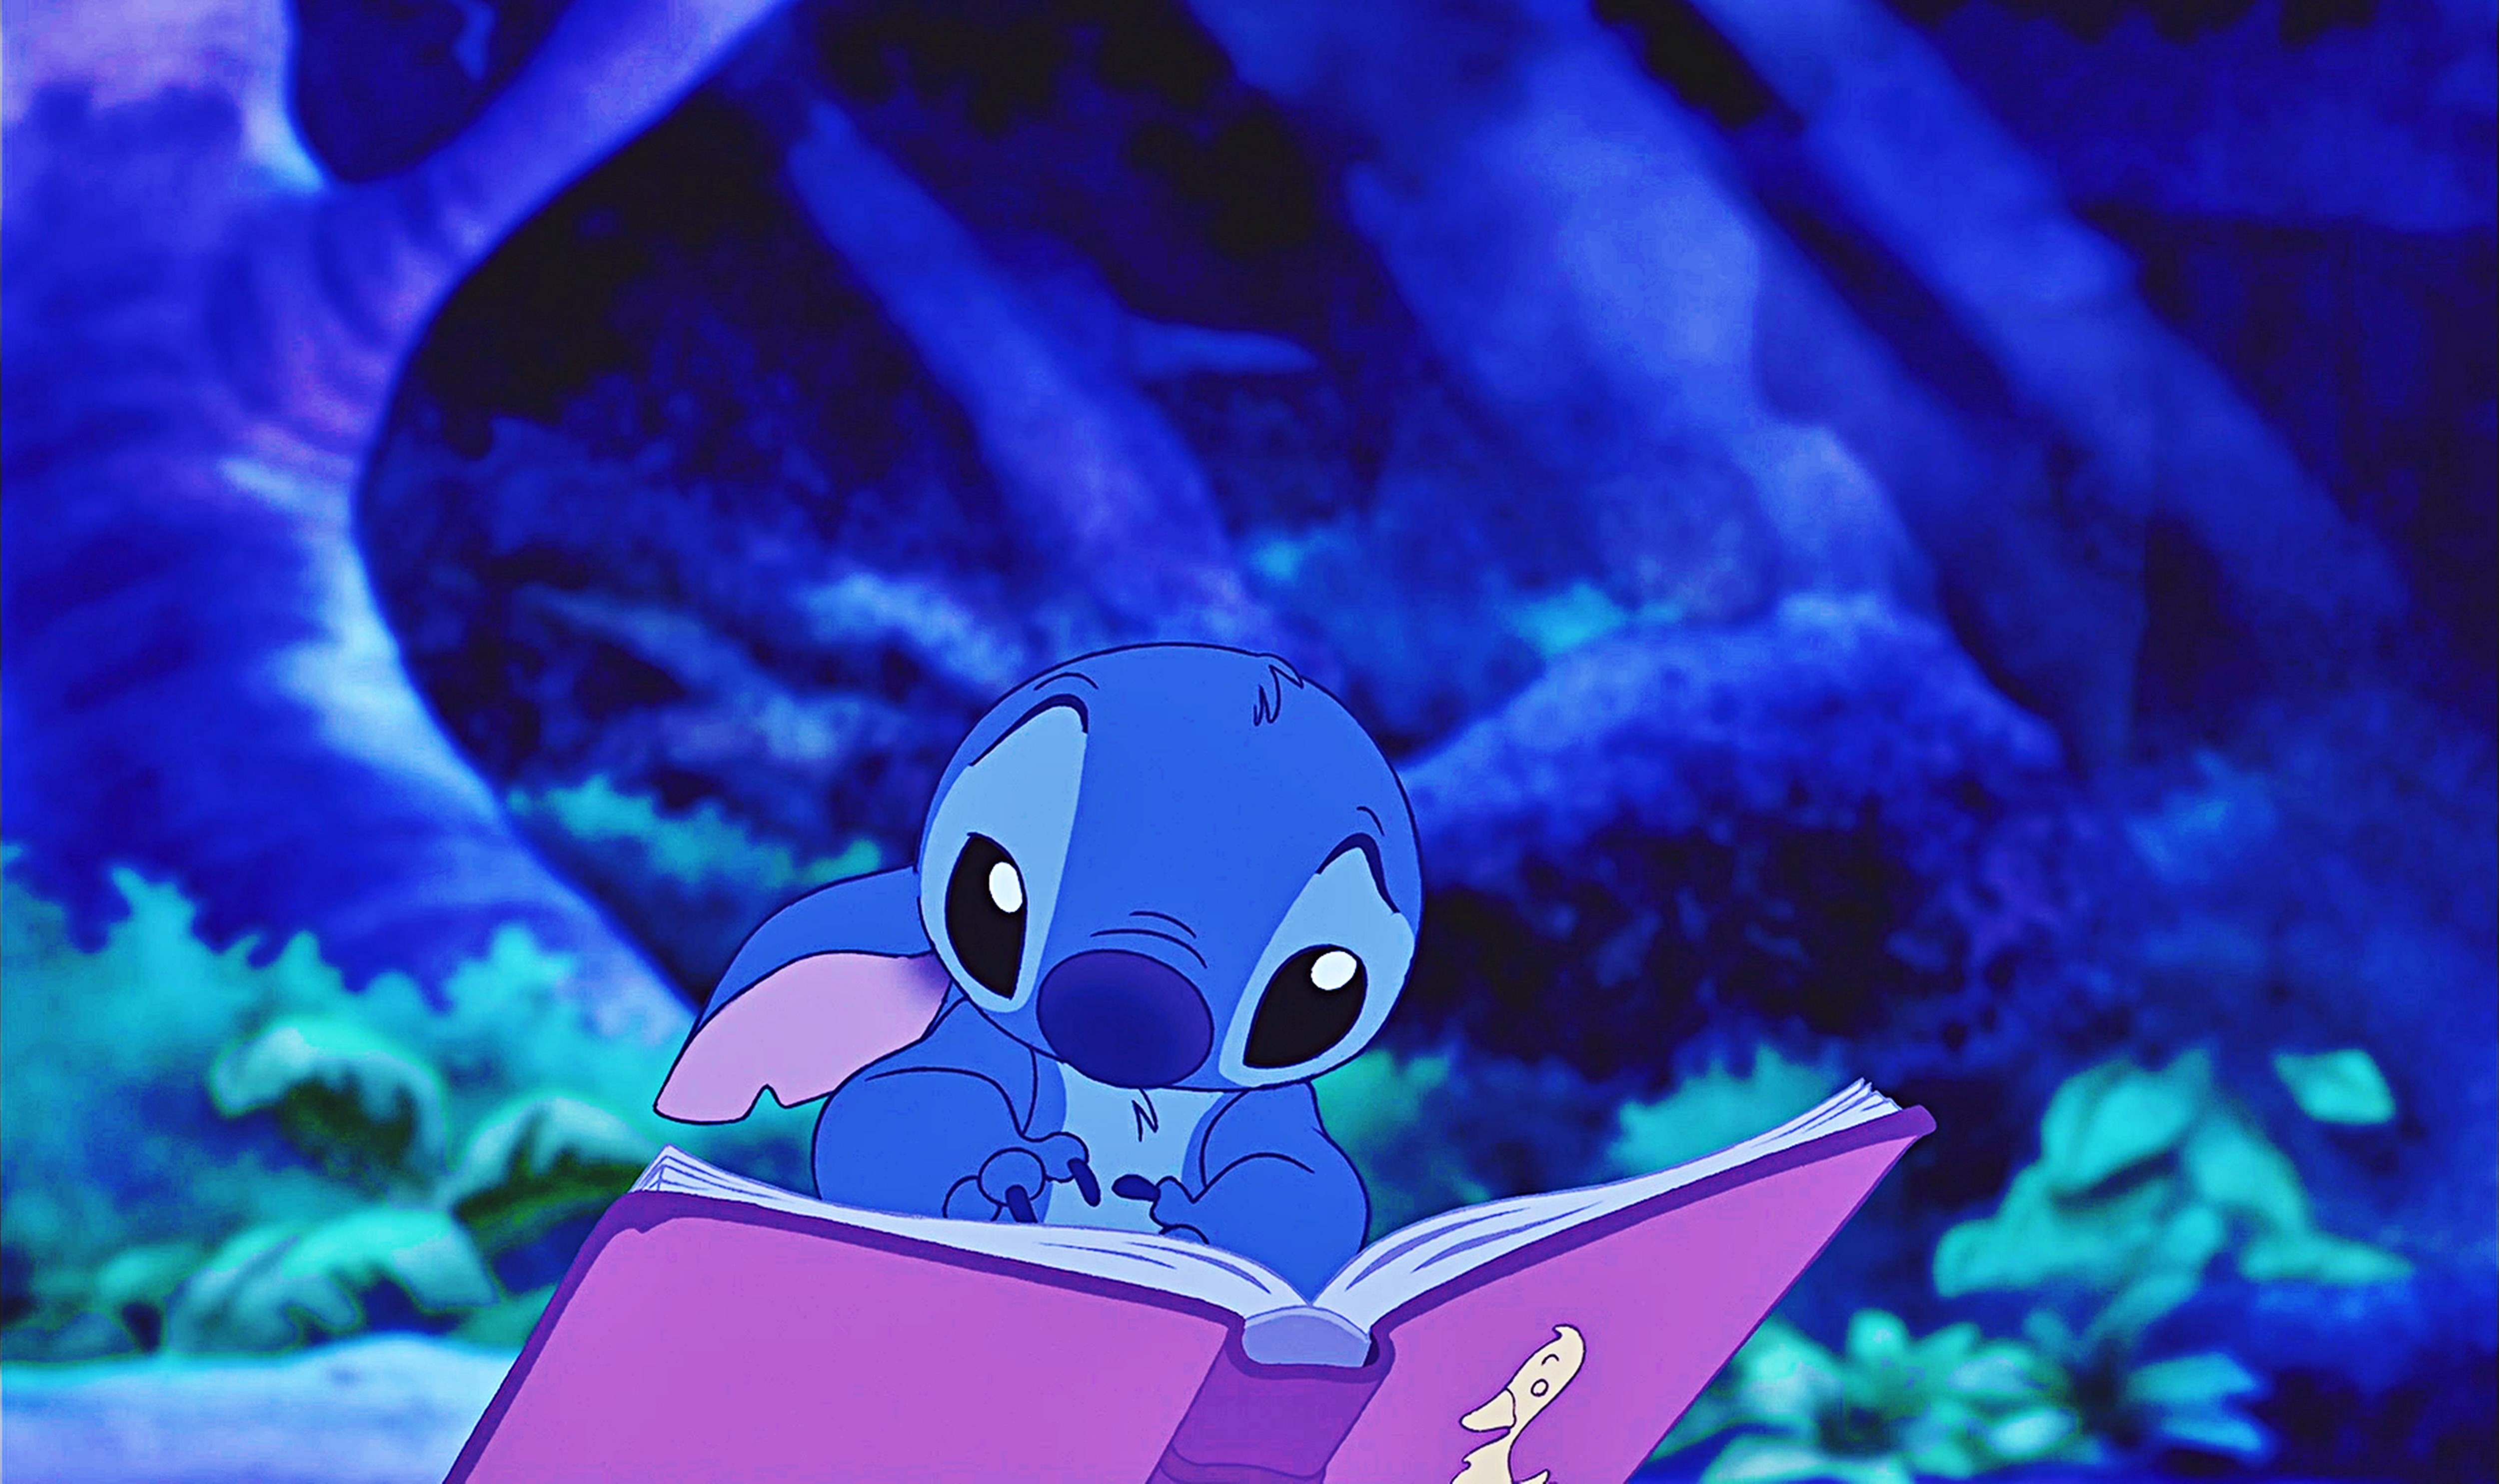 Aesthetic Stitch Laptop Wallpapers